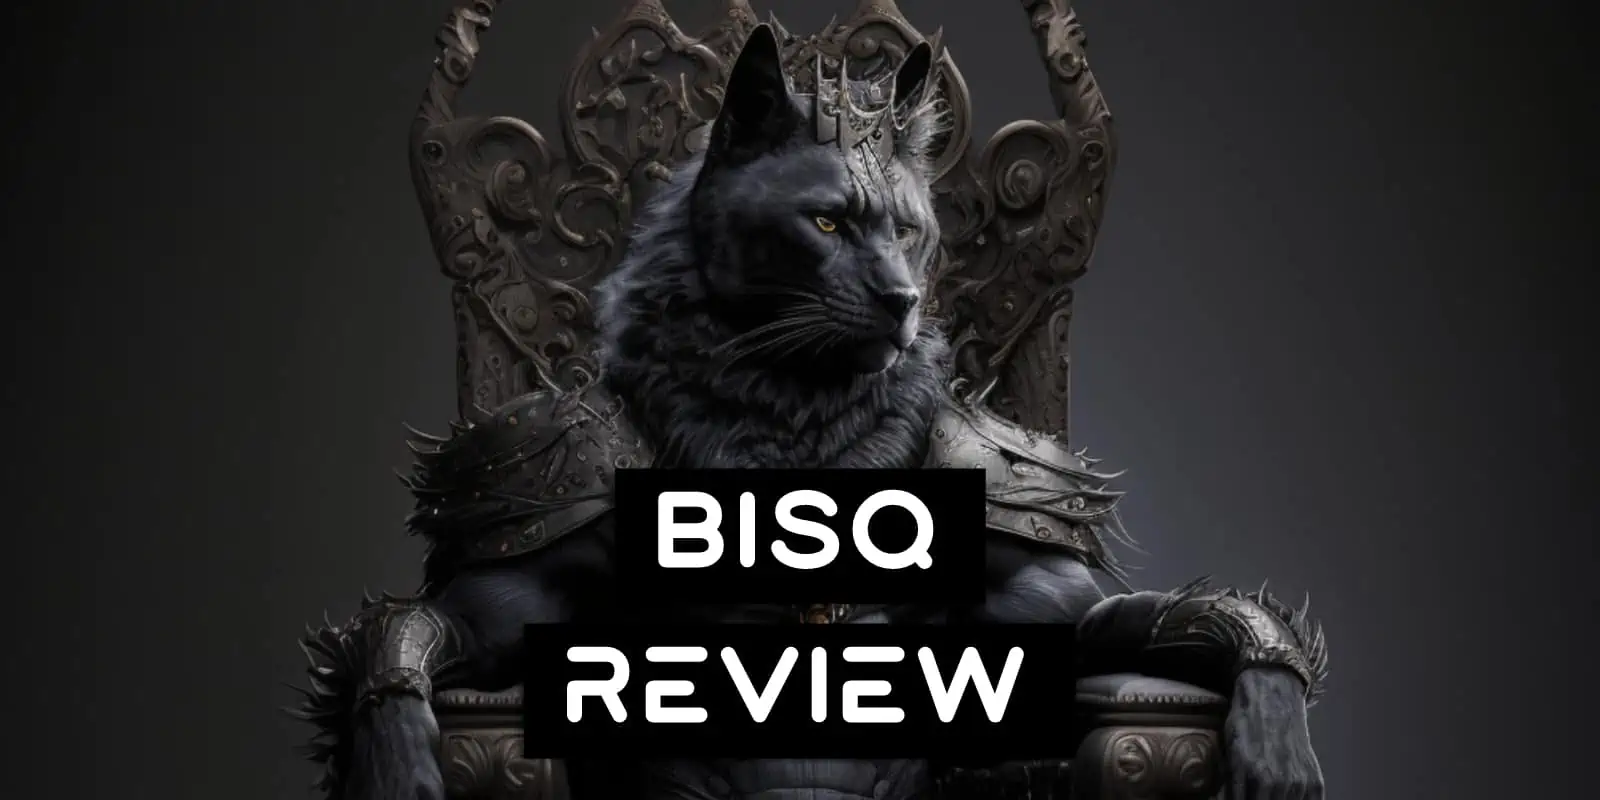 Bisq Review